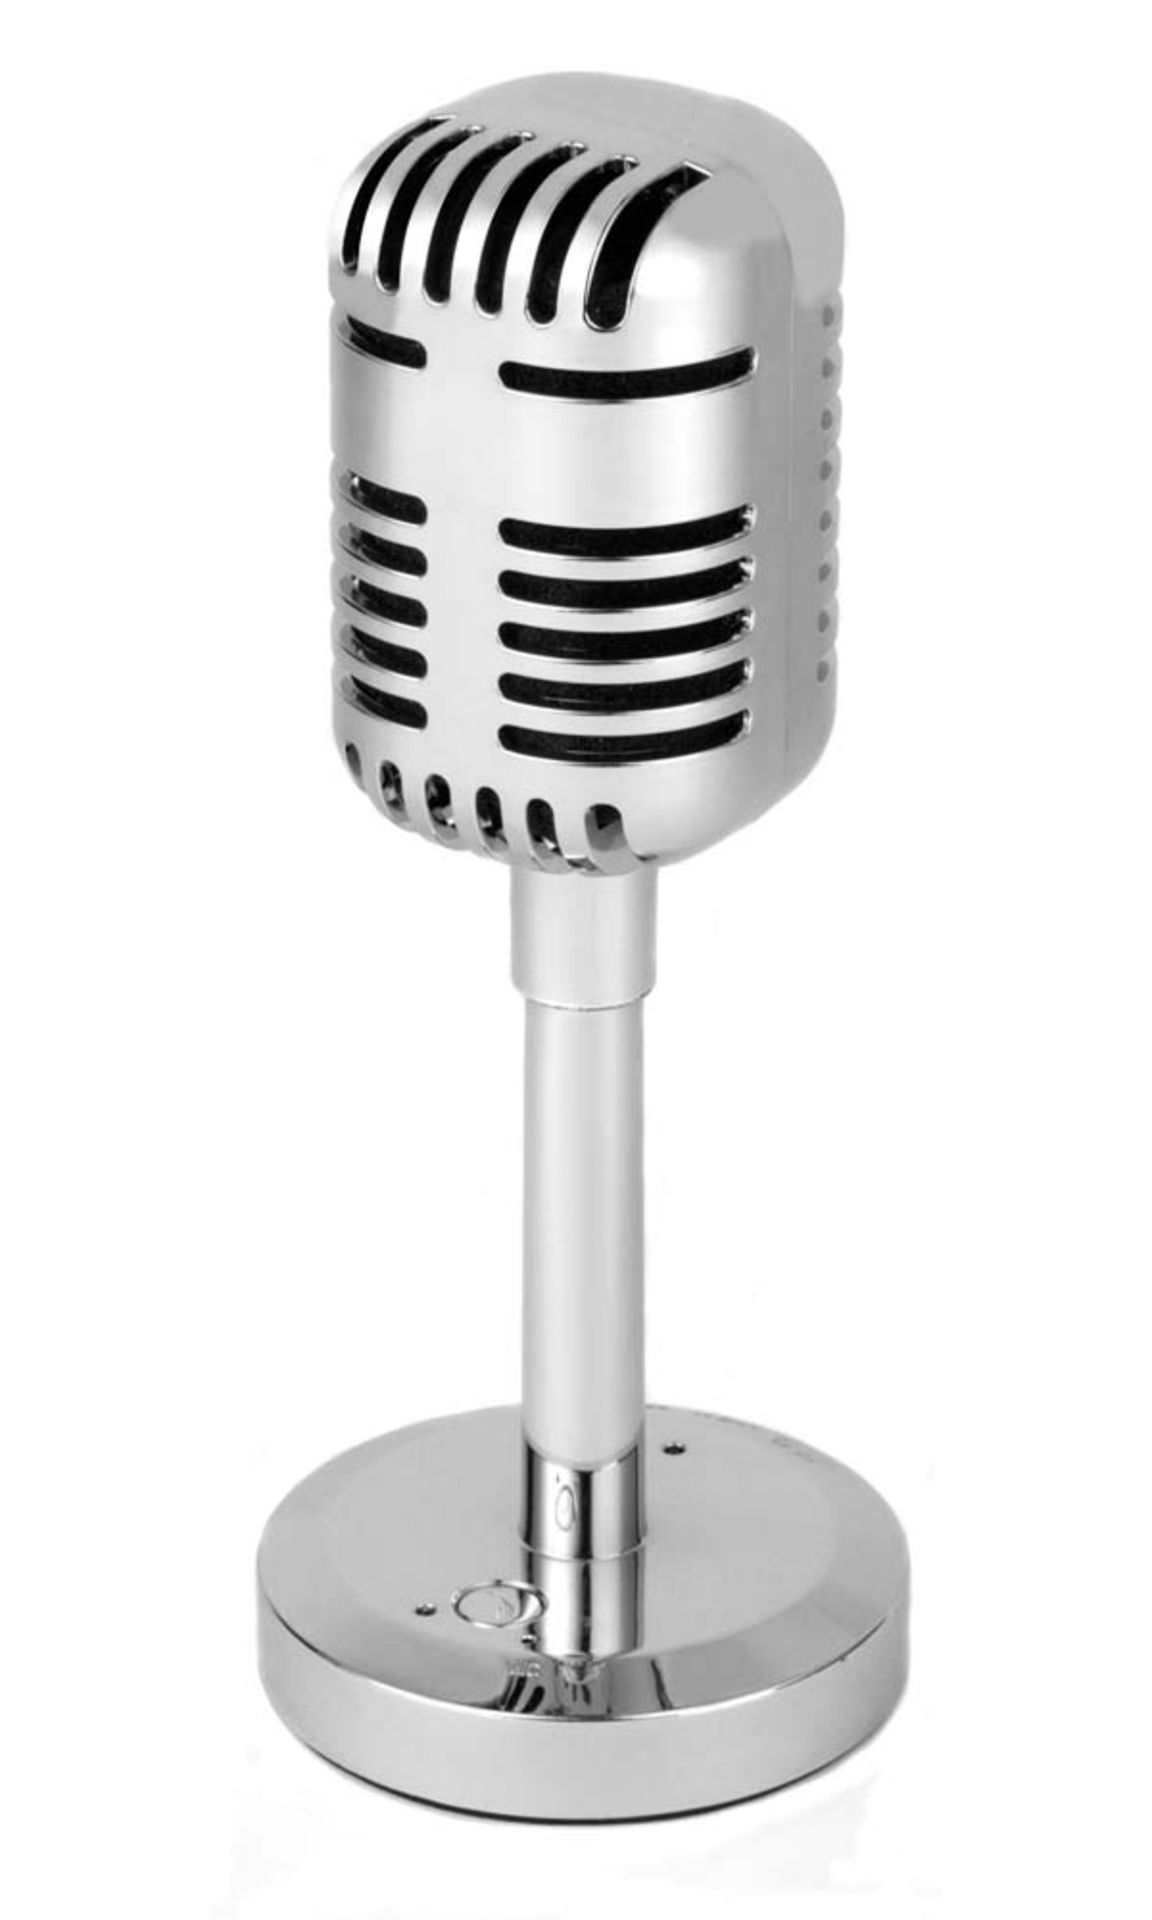 V Brand New Intempo Portable Microphone Speaker - Silver - ISP £20.00 (Ideal World) X 2 YOUR BID